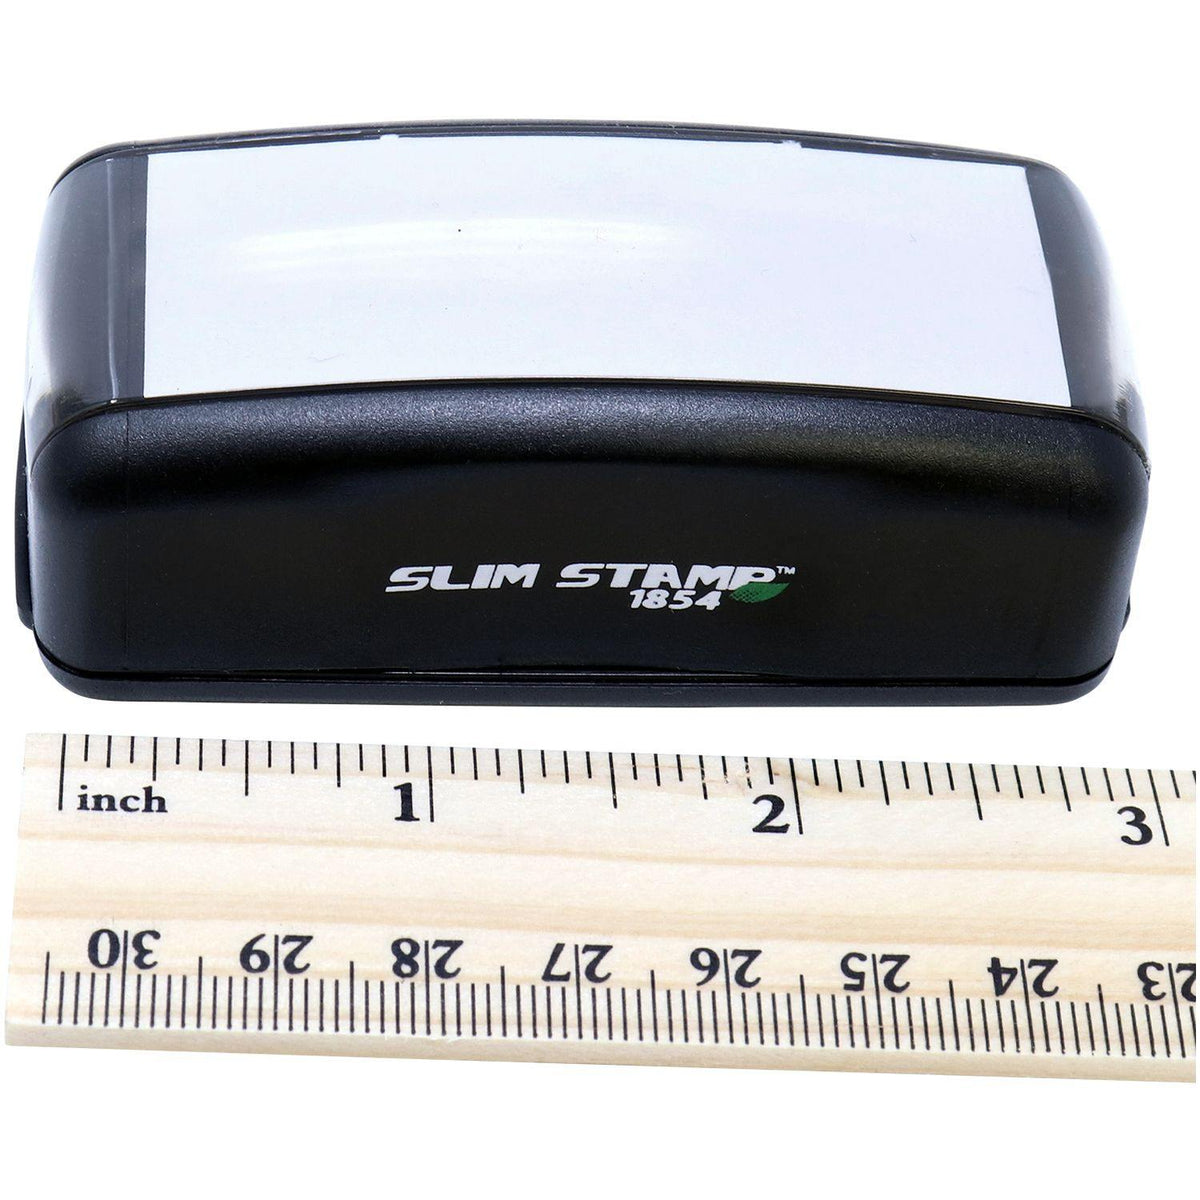 Measurement Large Pre Inked Make Up Work Stamp with Ruler